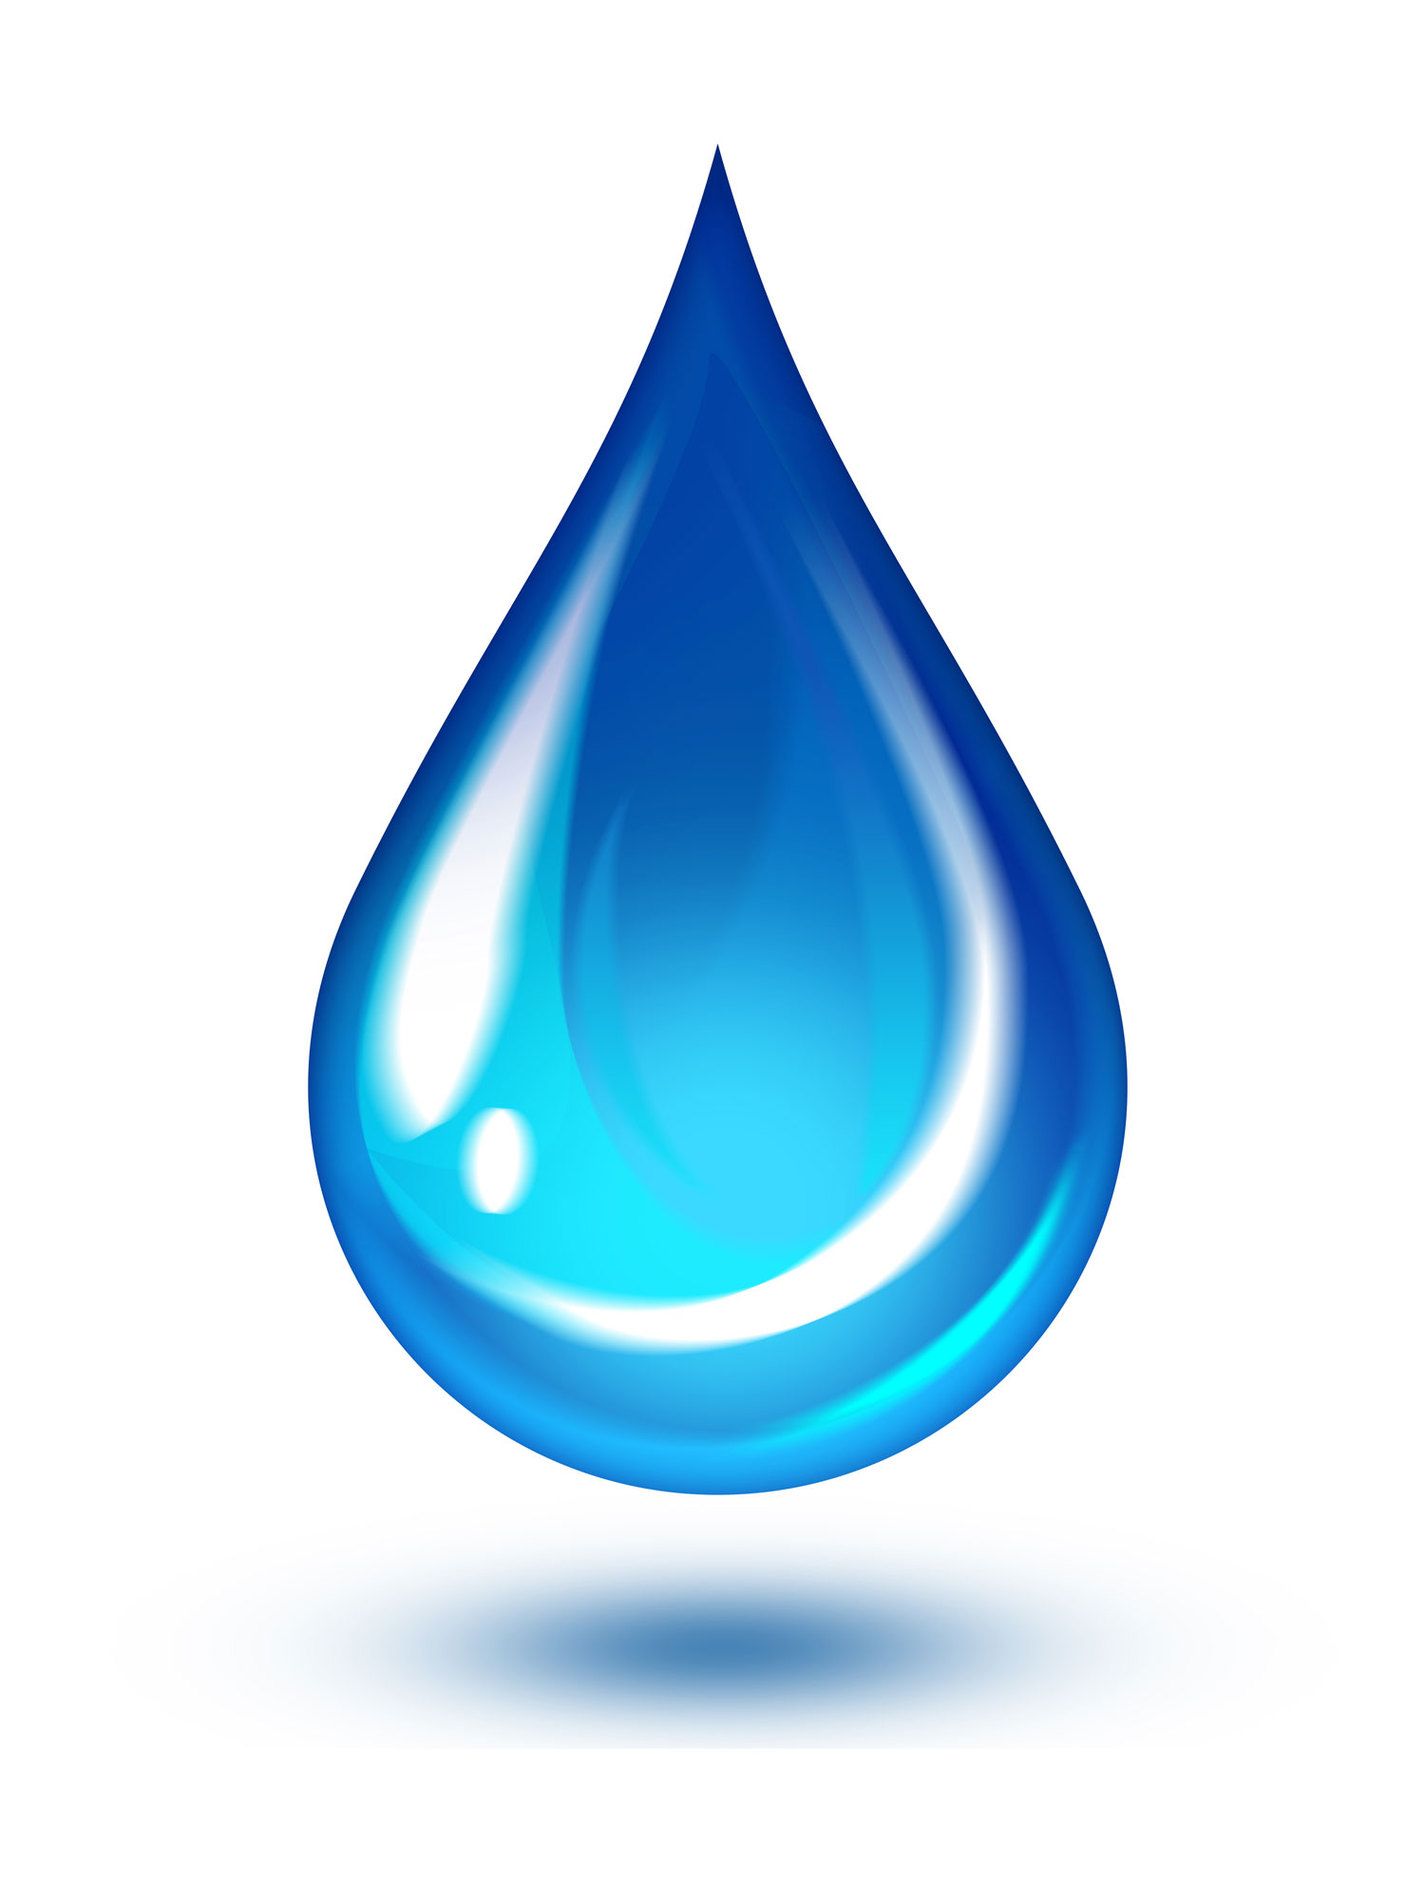 Water drop symbol clipart free to use clip art resource | Pics/Words ...